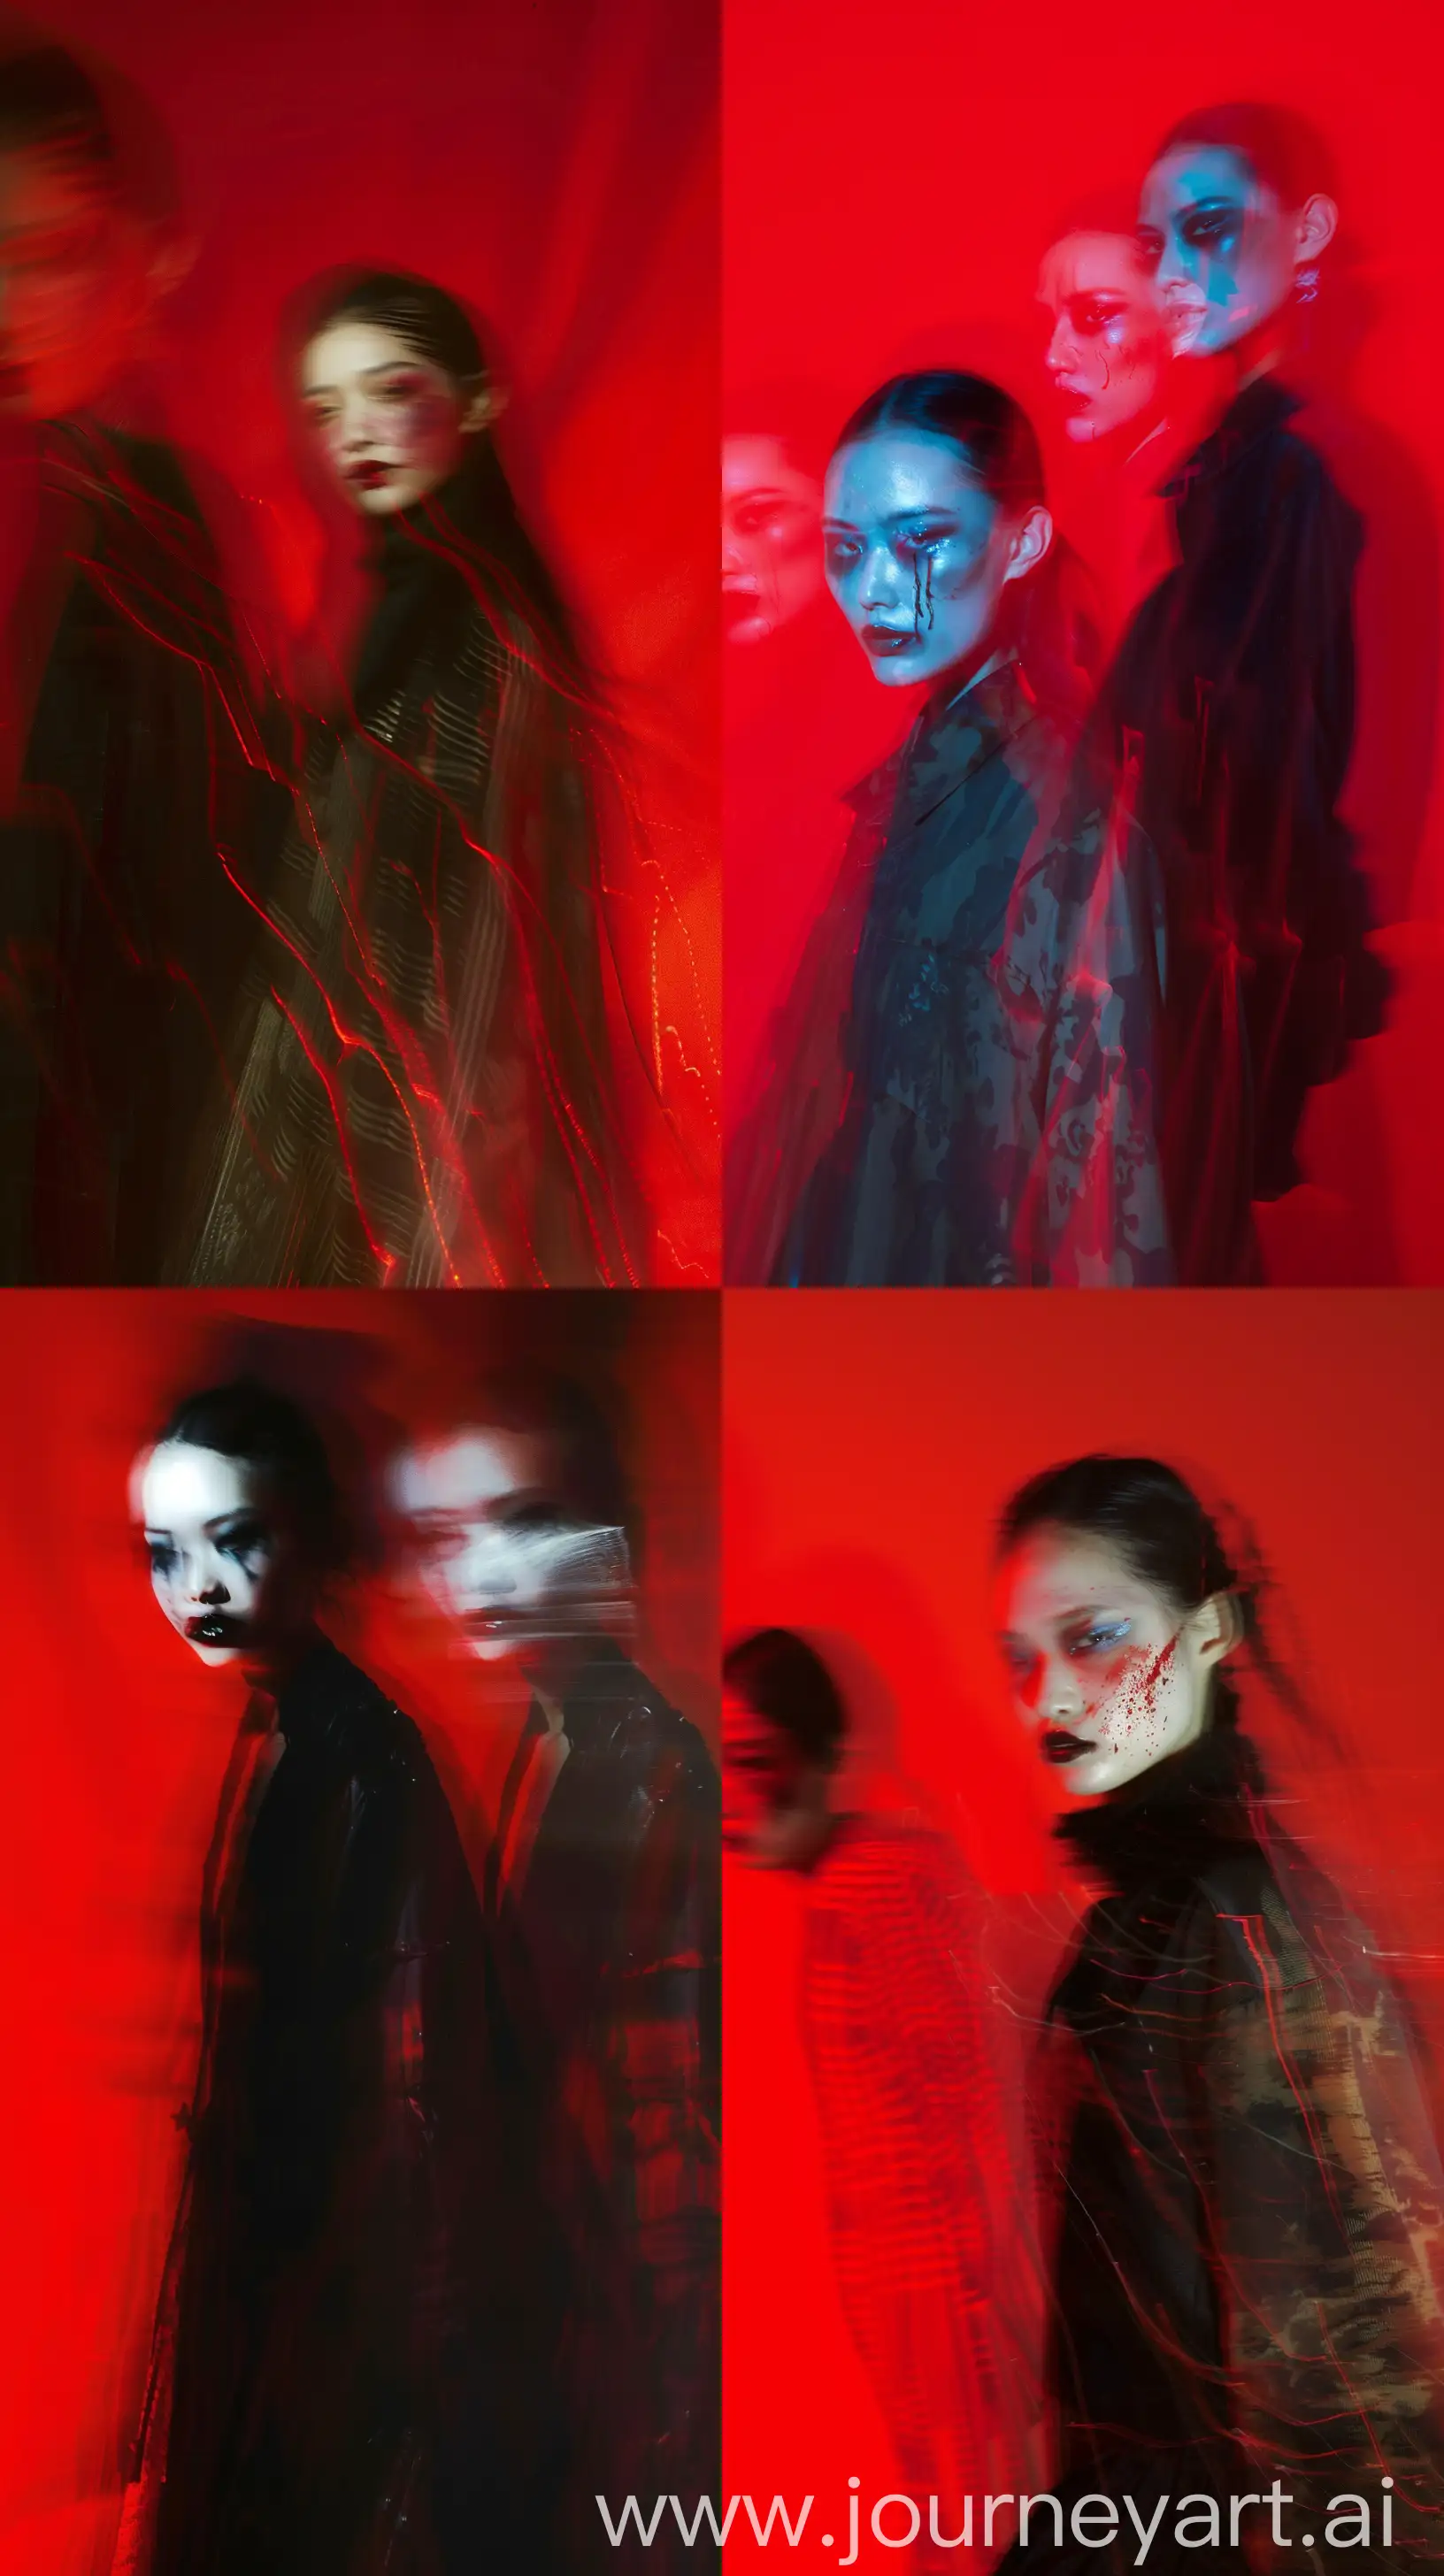 Create image image, blurred oriental balenciaga female models figures are depicted against a red background. wounded make up, The motion blur creates a ghostly, ethereal effect, with clothing details obscured. One figure in the foreground appears to be wearing a oversized horror high fashion blackout,  The lighting and blur lend a mysterious, almost haunting quality to the scene, nocturnal fashion scene --ar 9:16